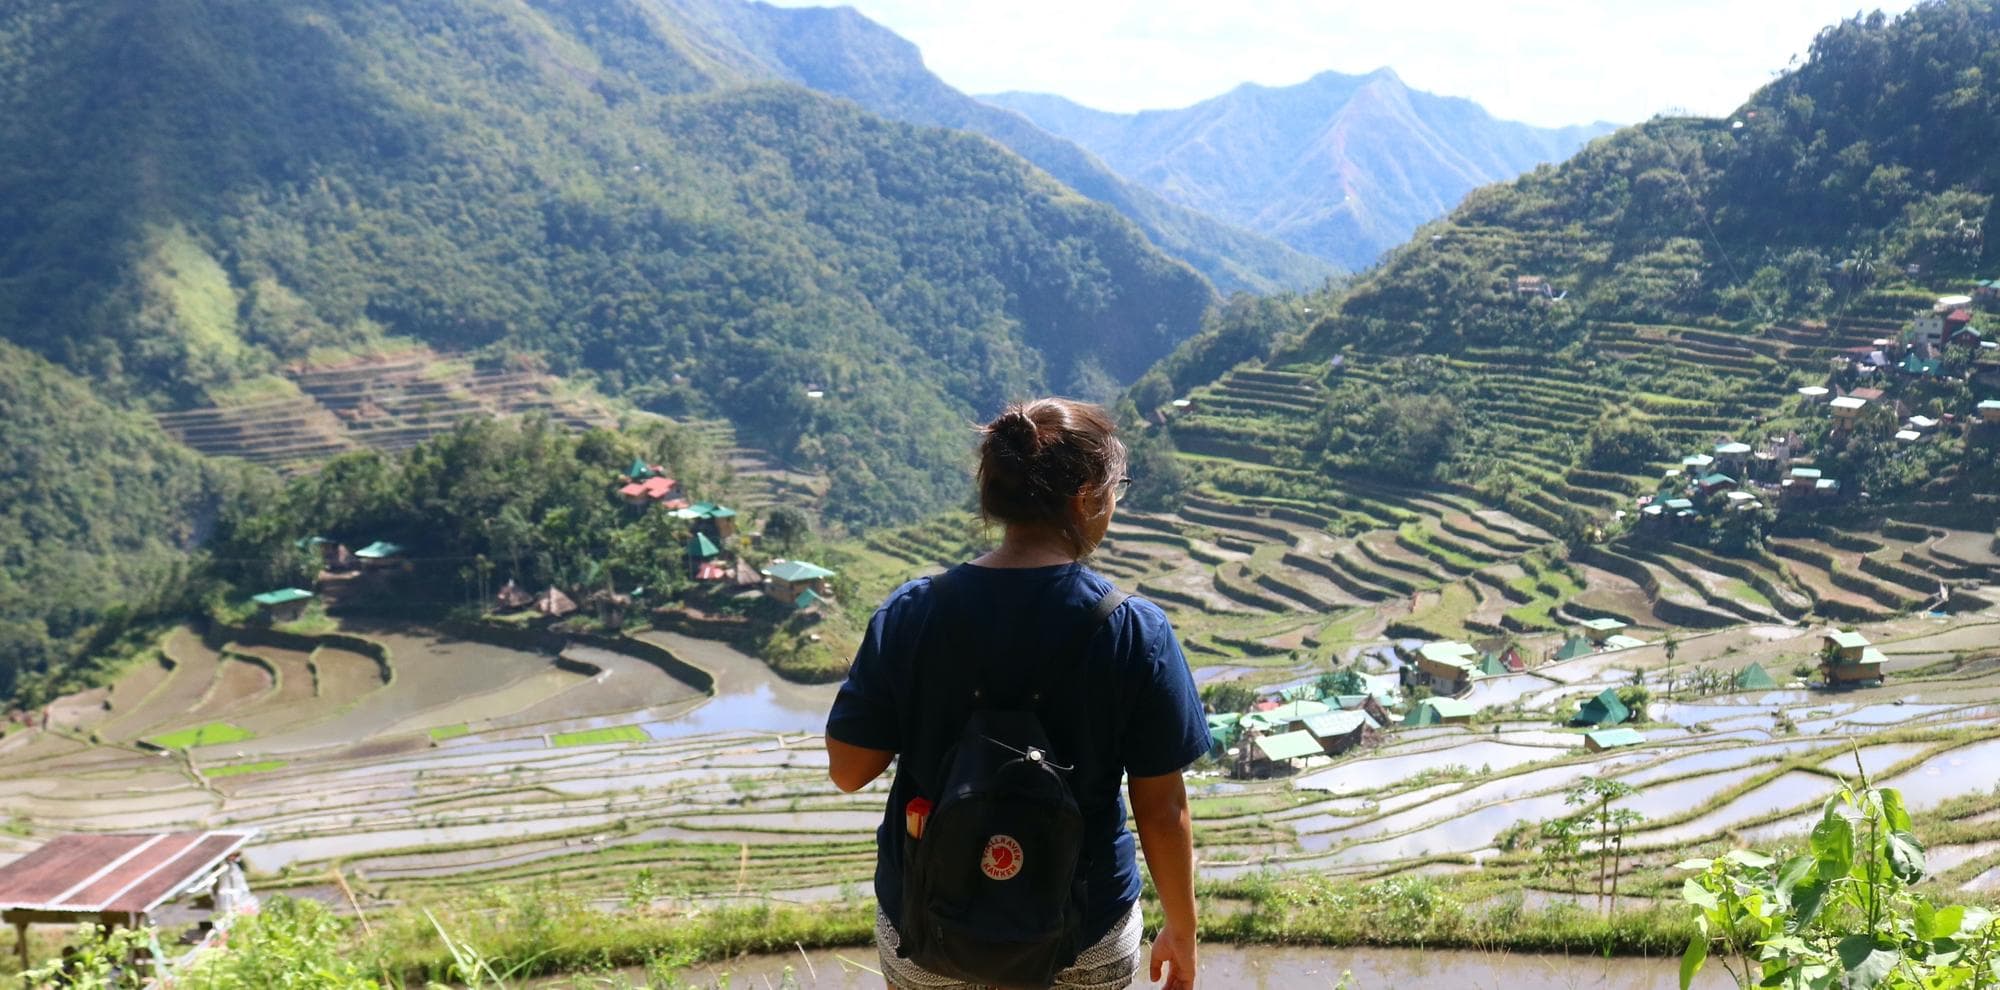 Steph viewing the mountains in batad - northern philippines